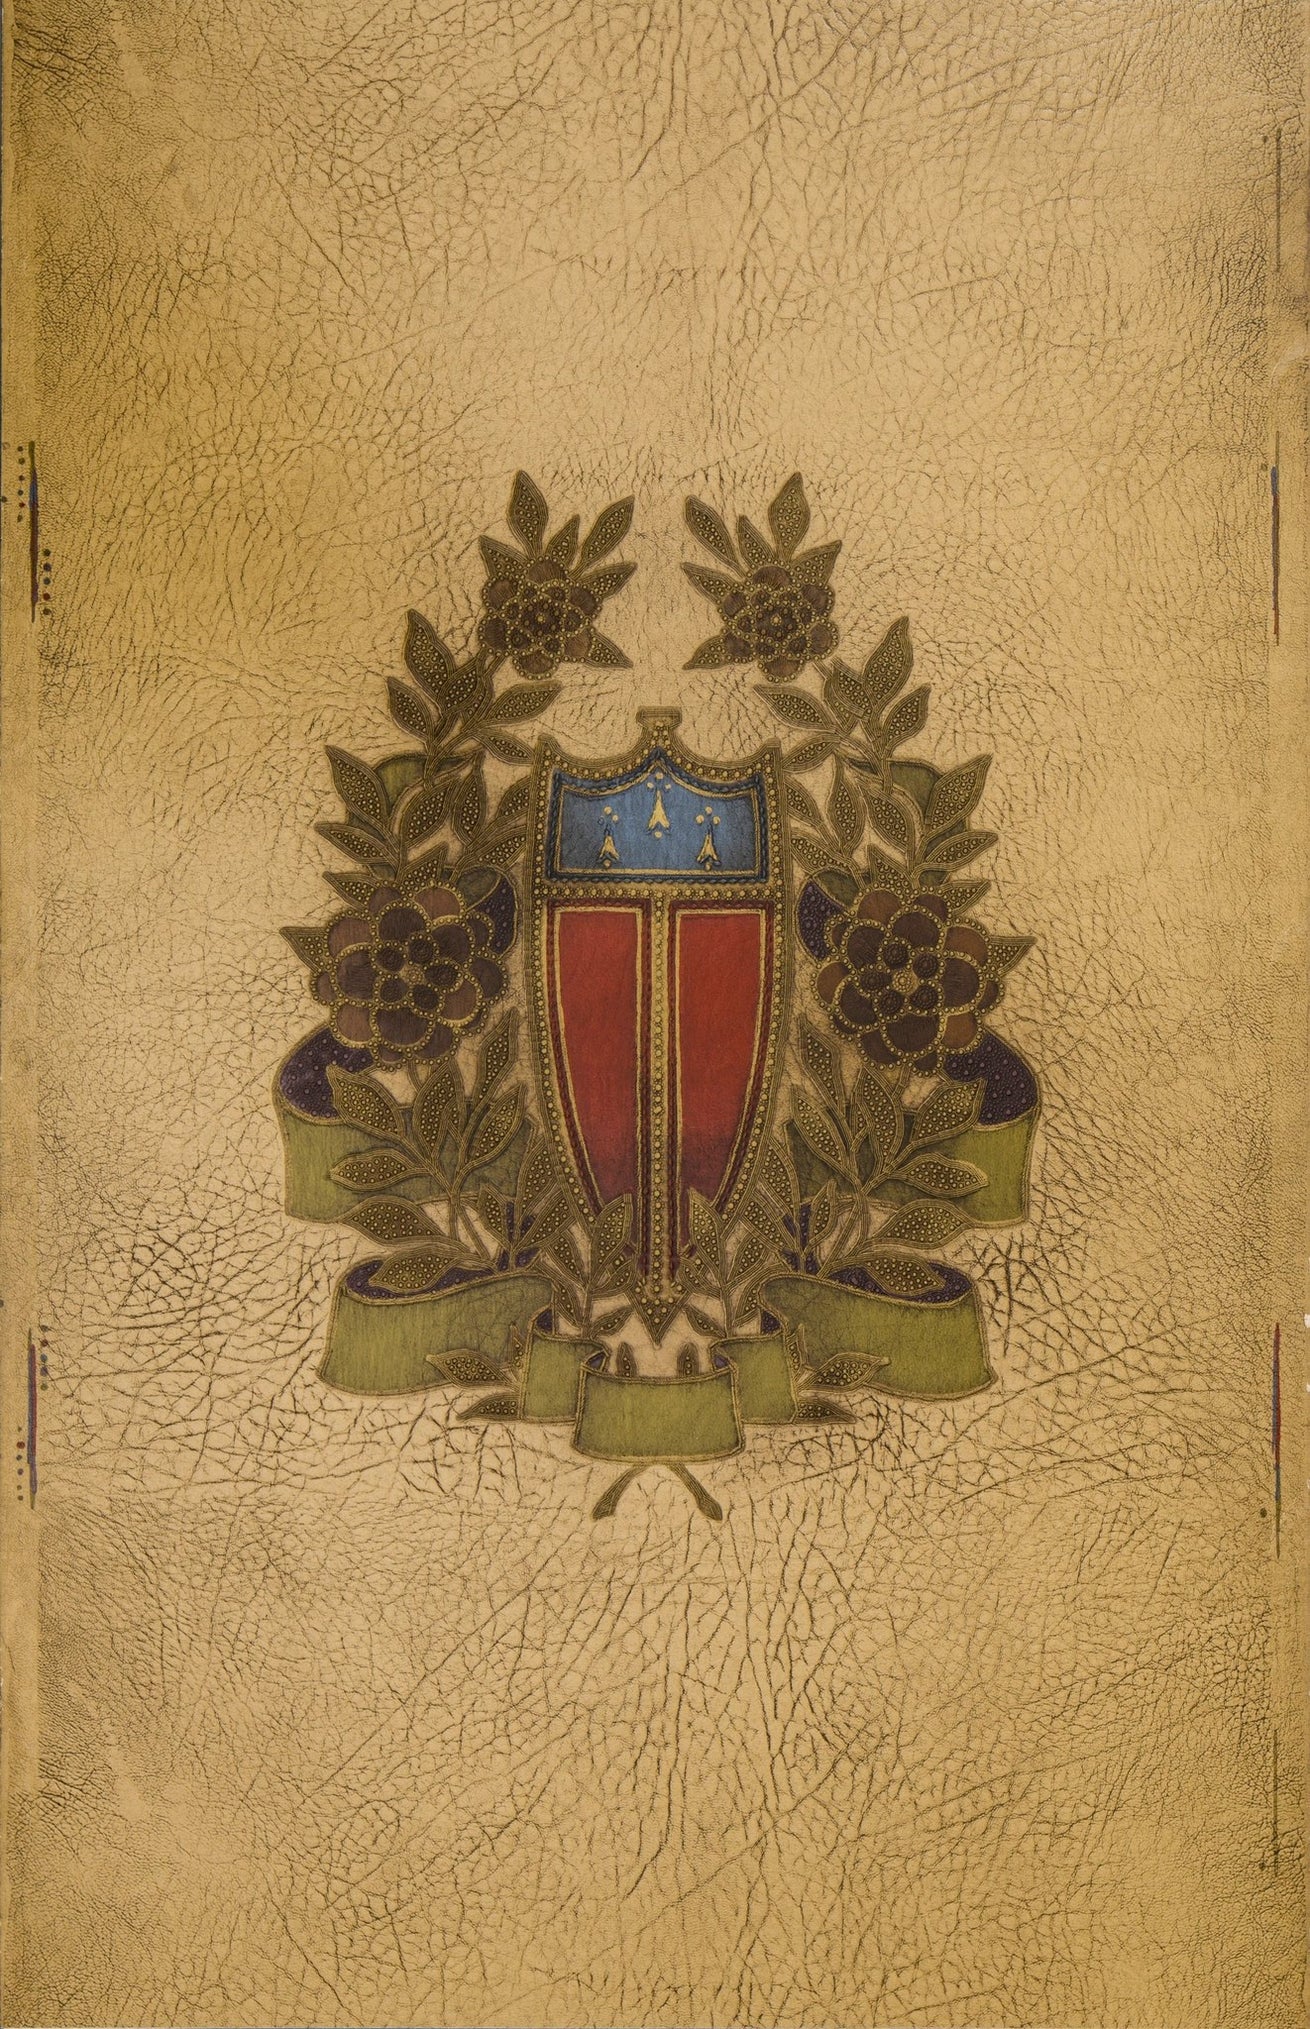 Embossed Shield and Wreath on Leather - Antique Wallpaper Remnant